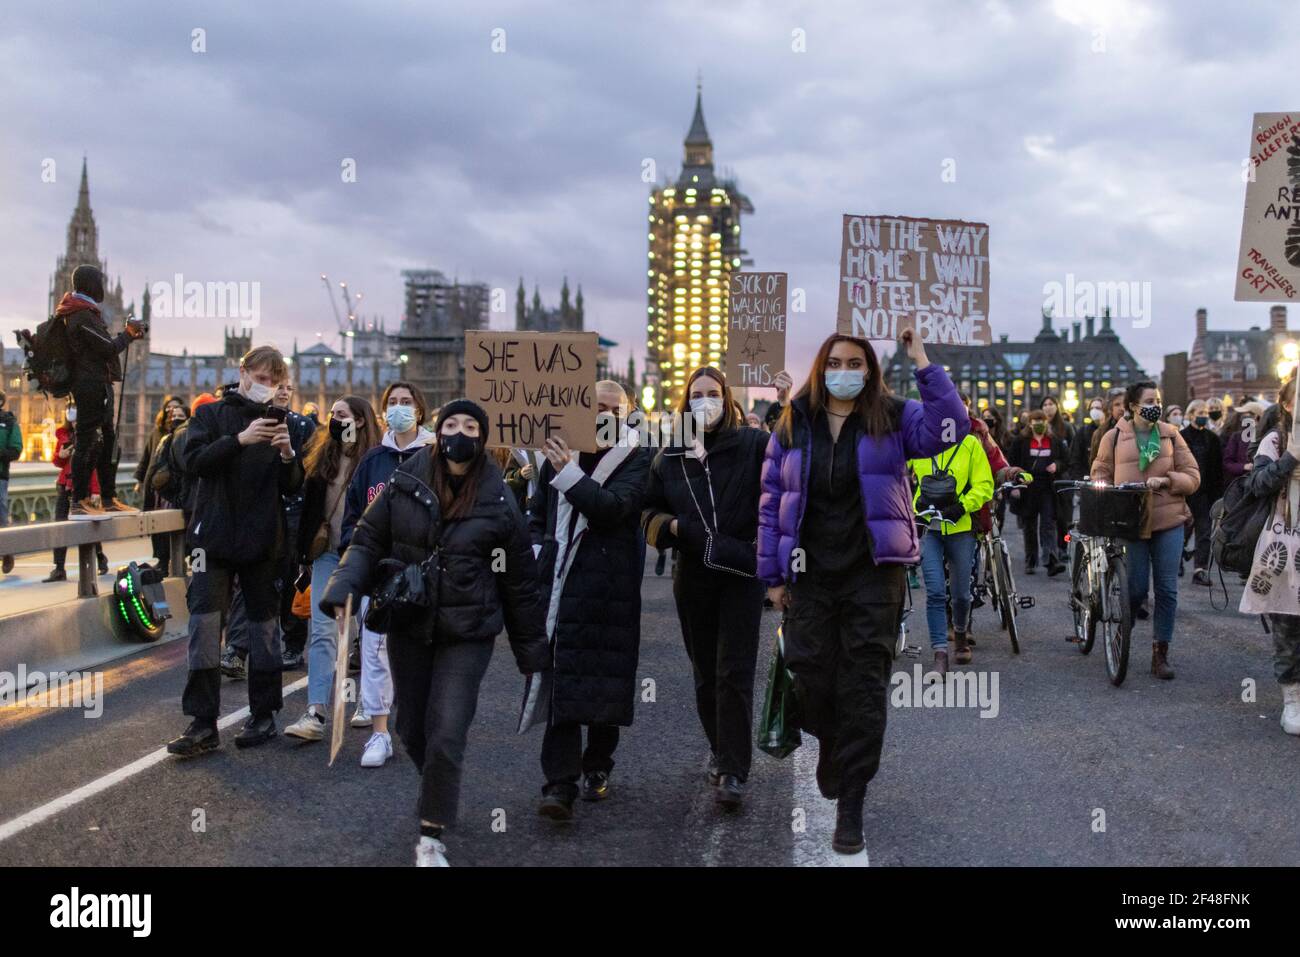 Westminster Bridge, London, 15 March 2021 - 'Kill the Bill' protest against new policing bill and oppression of women. Stock Photo